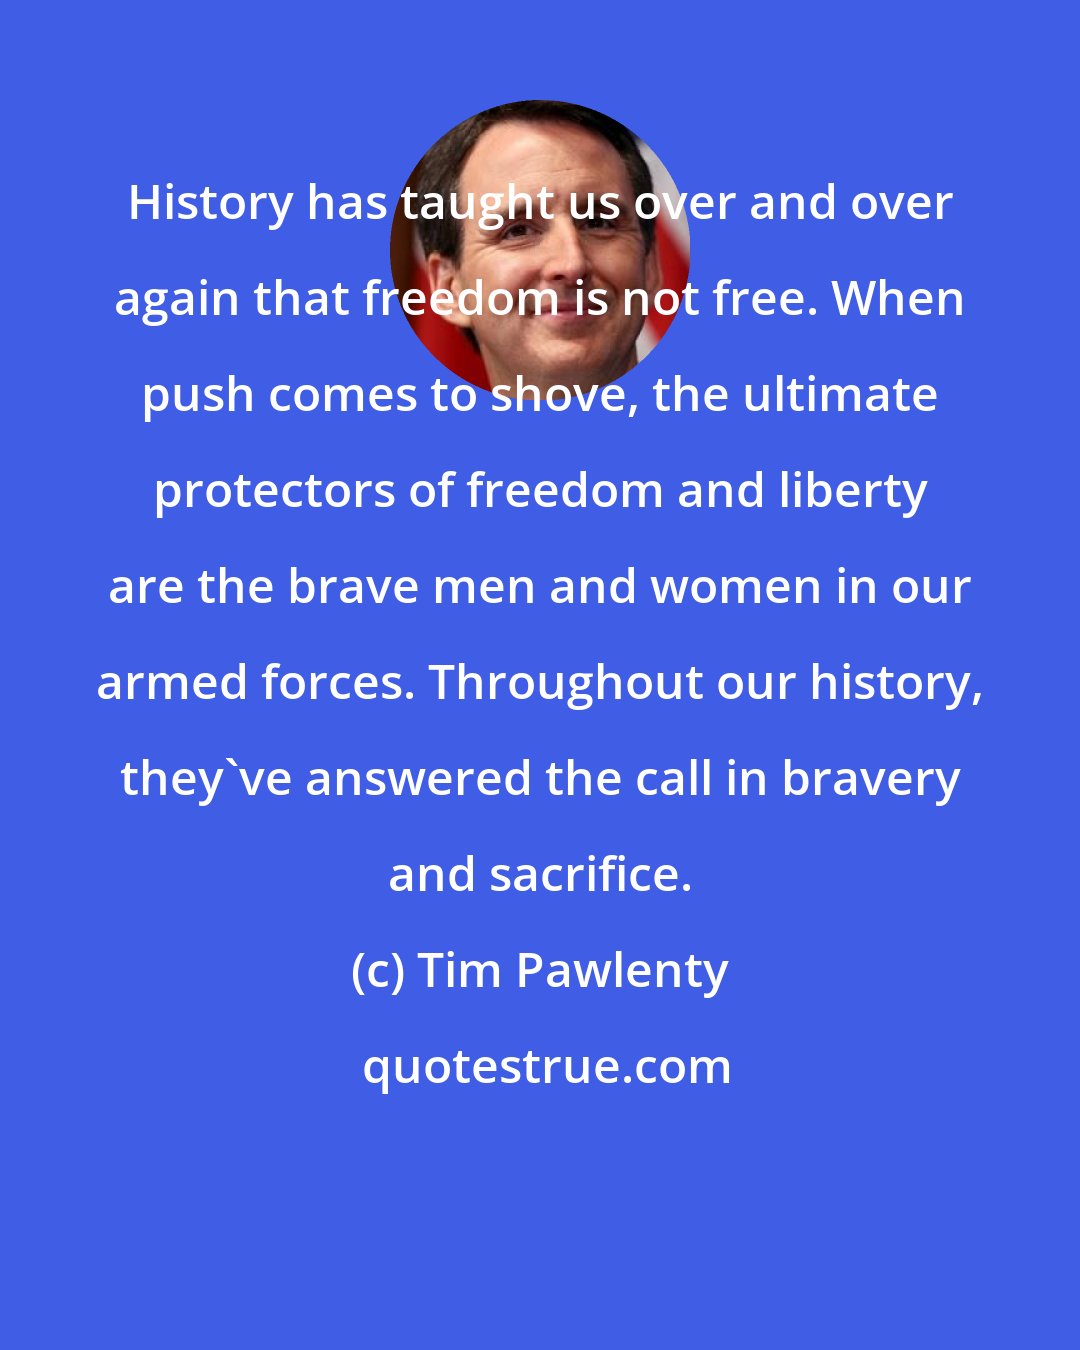 Tim Pawlenty: History has taught us over and over again that freedom is not free. When push comes to shove, the ultimate protectors of freedom and liberty are the brave men and women in our armed forces. Throughout our history, they've answered the call in bravery and sacrifice.